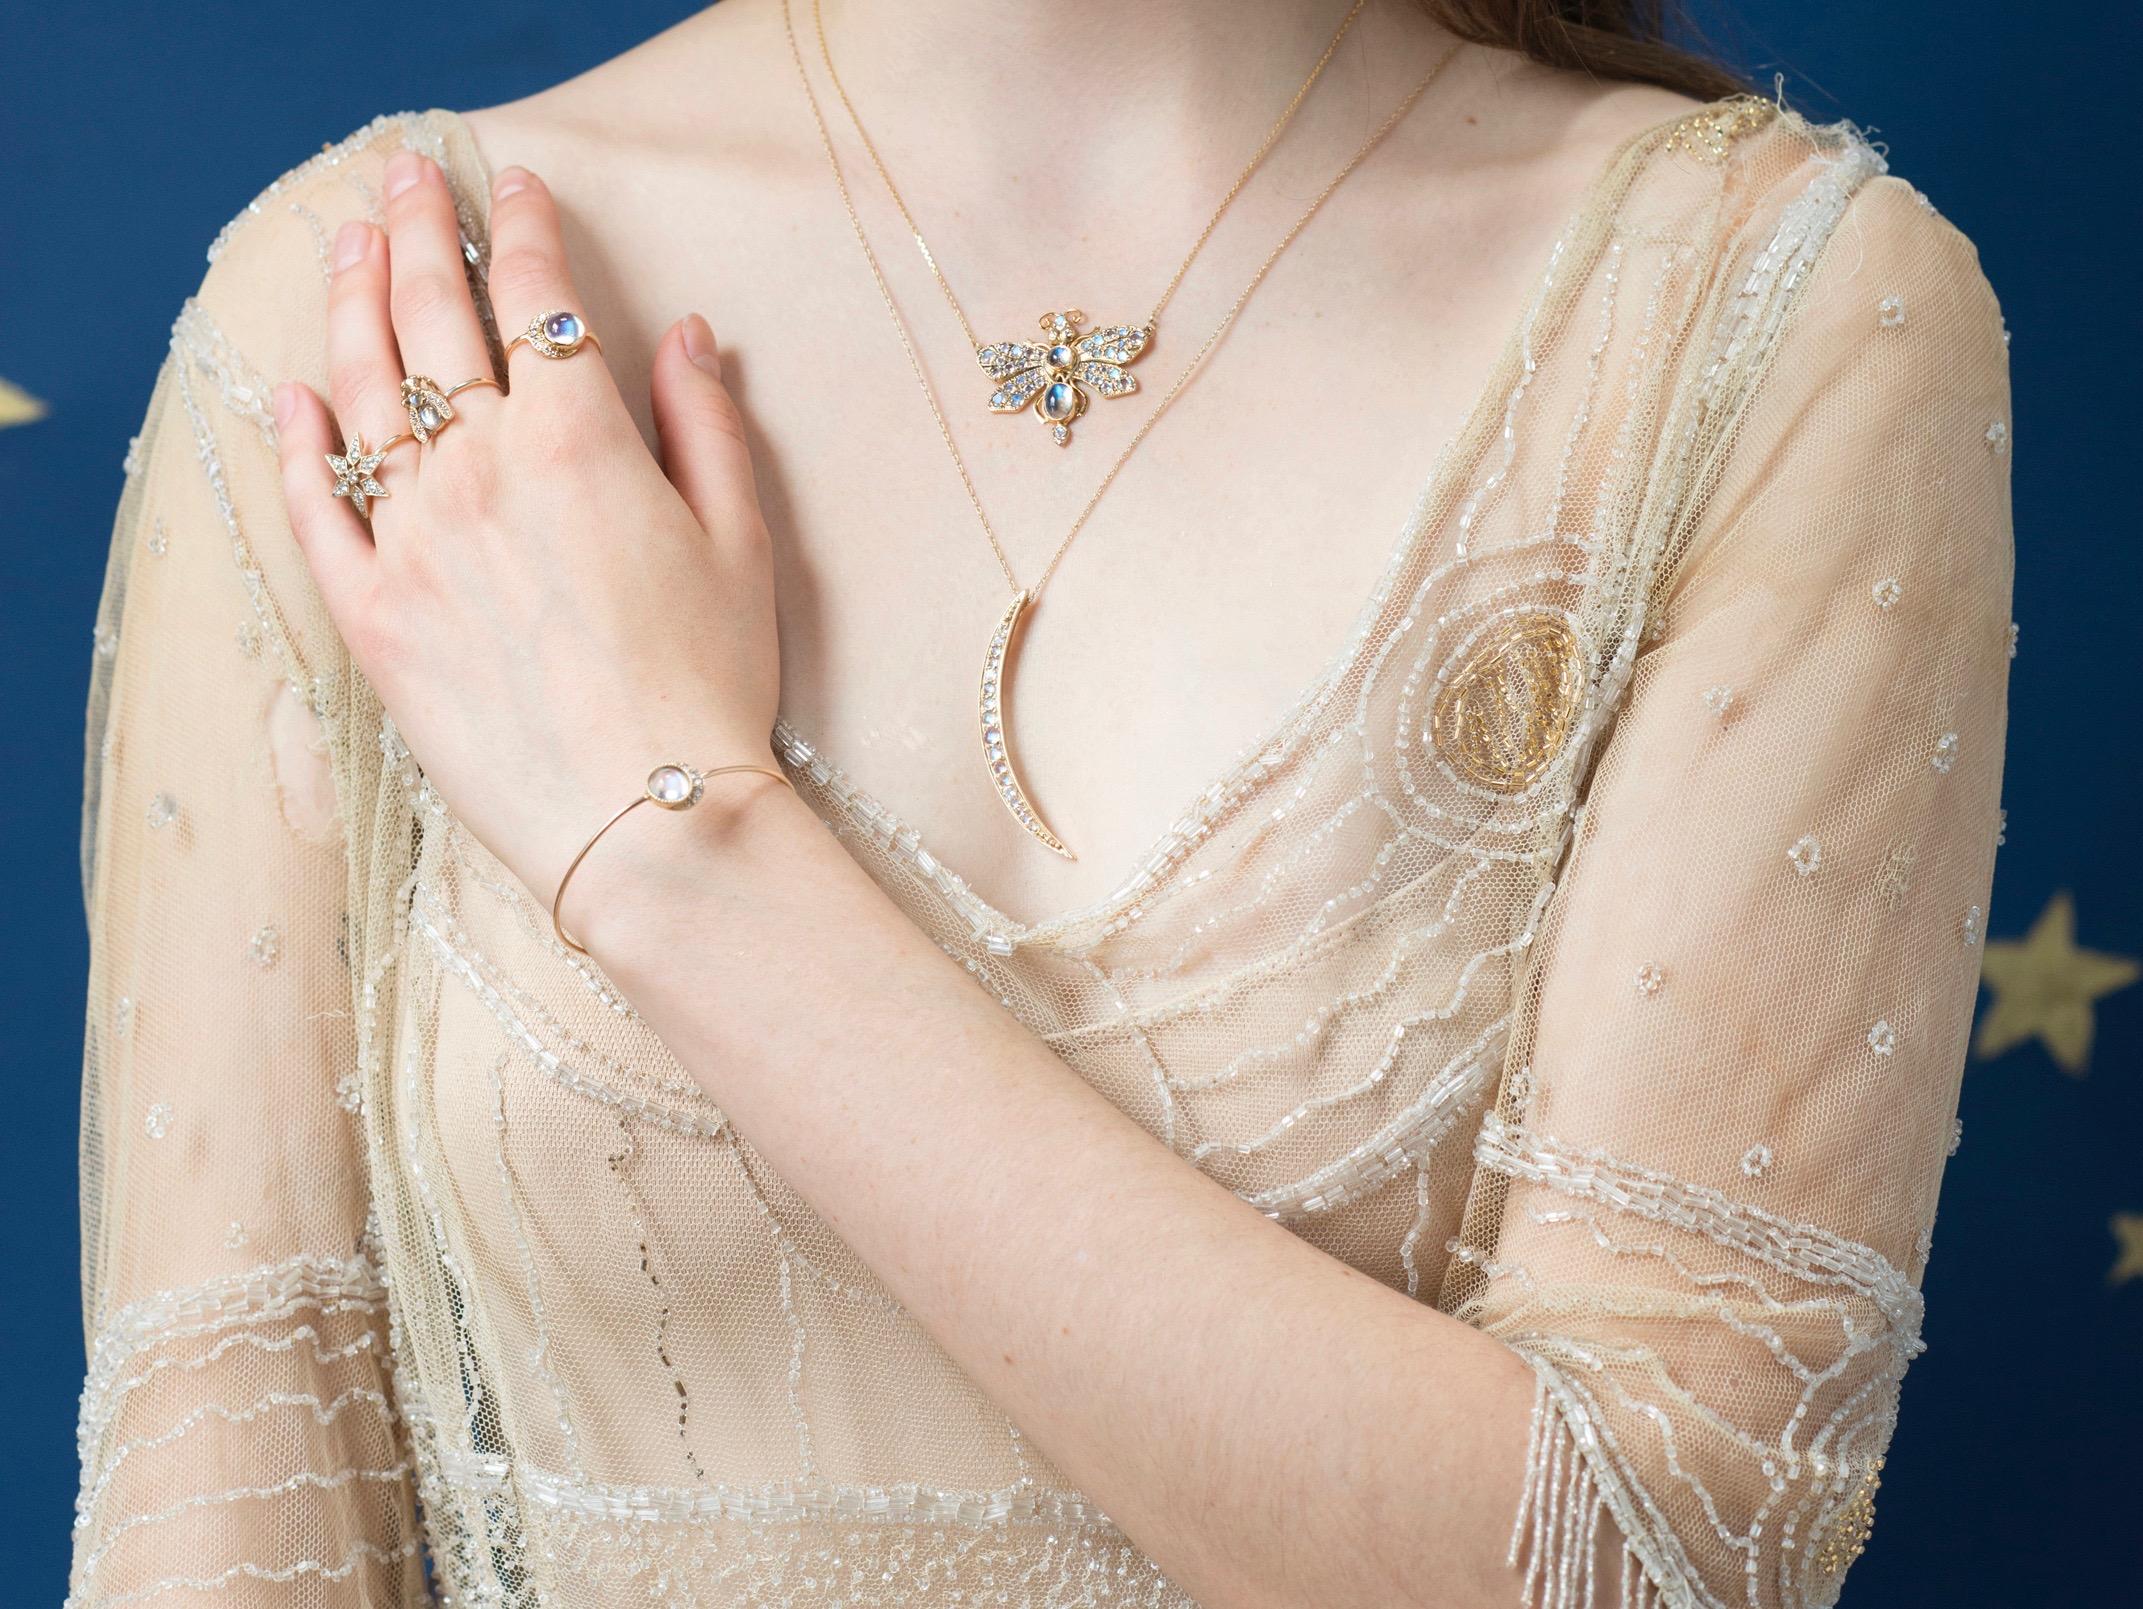 Our 'Moon Slice' Necklace is a poetic wonder. Cast in 14k yellow gold and set with rare, rose cut moonstones. The crescent charm hangs on an 18-20